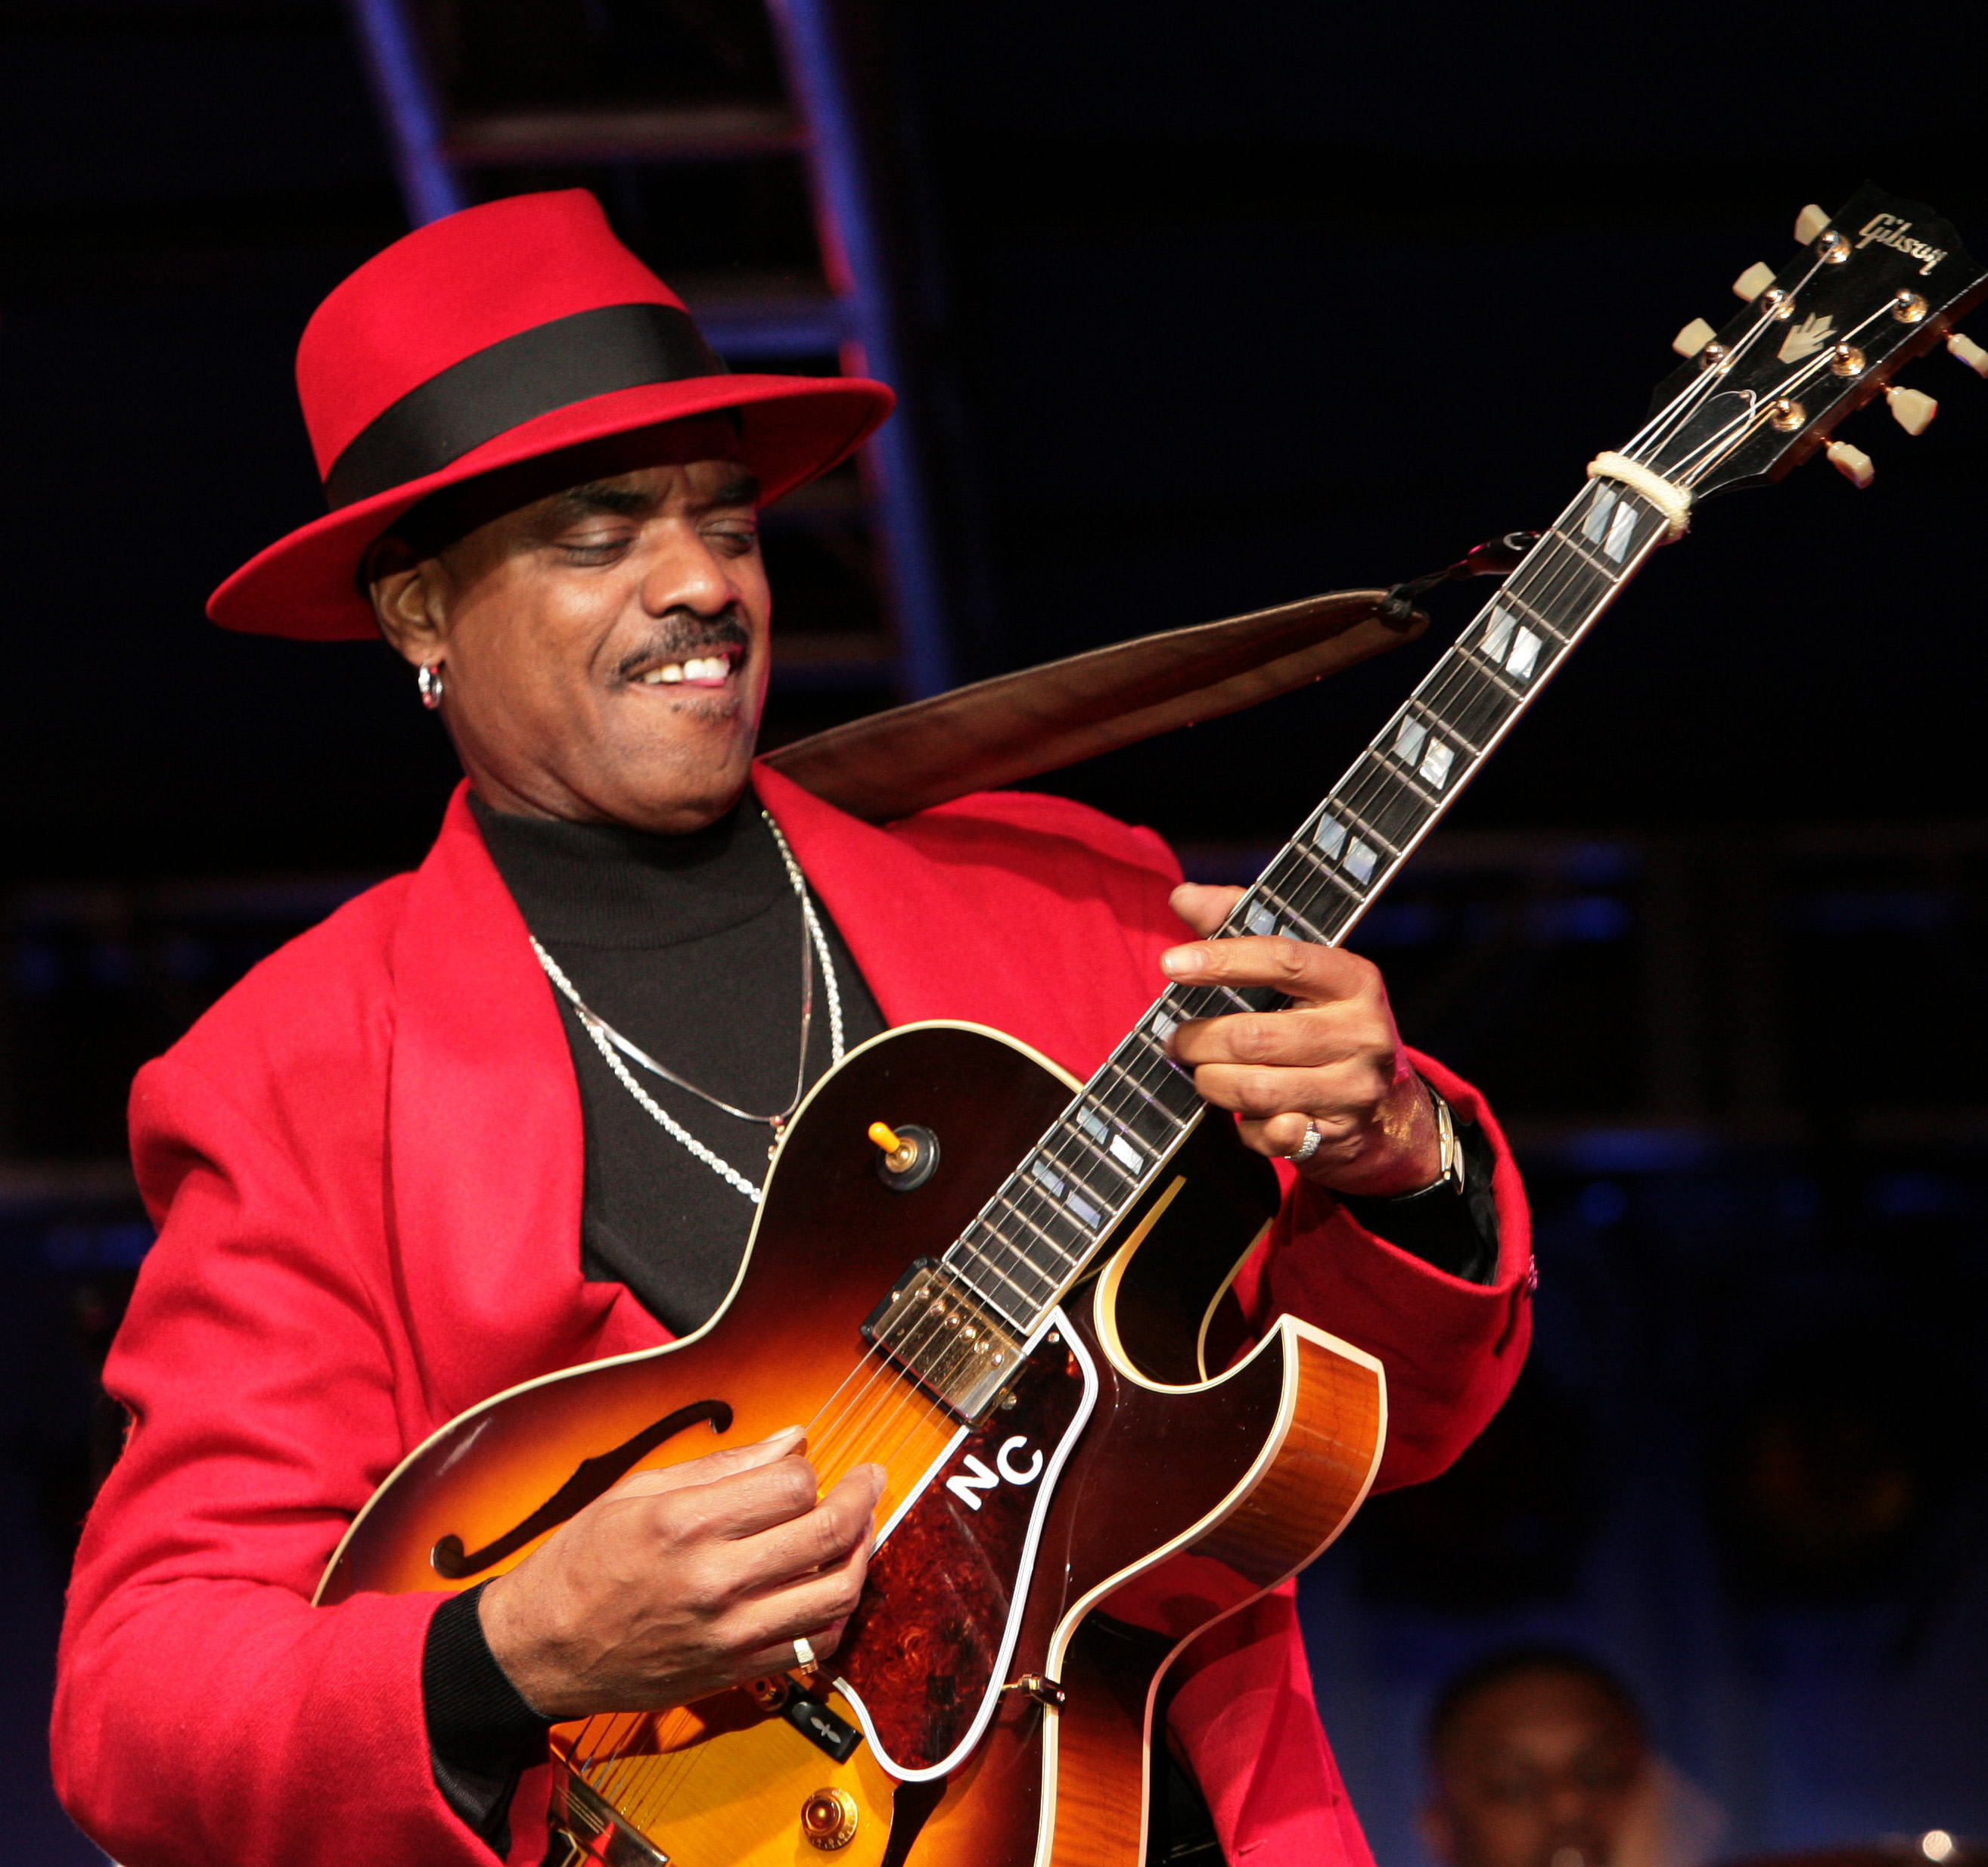 Guitarist Nick Colionne bring a little Chicago style smooth jazz to Panama City Beach